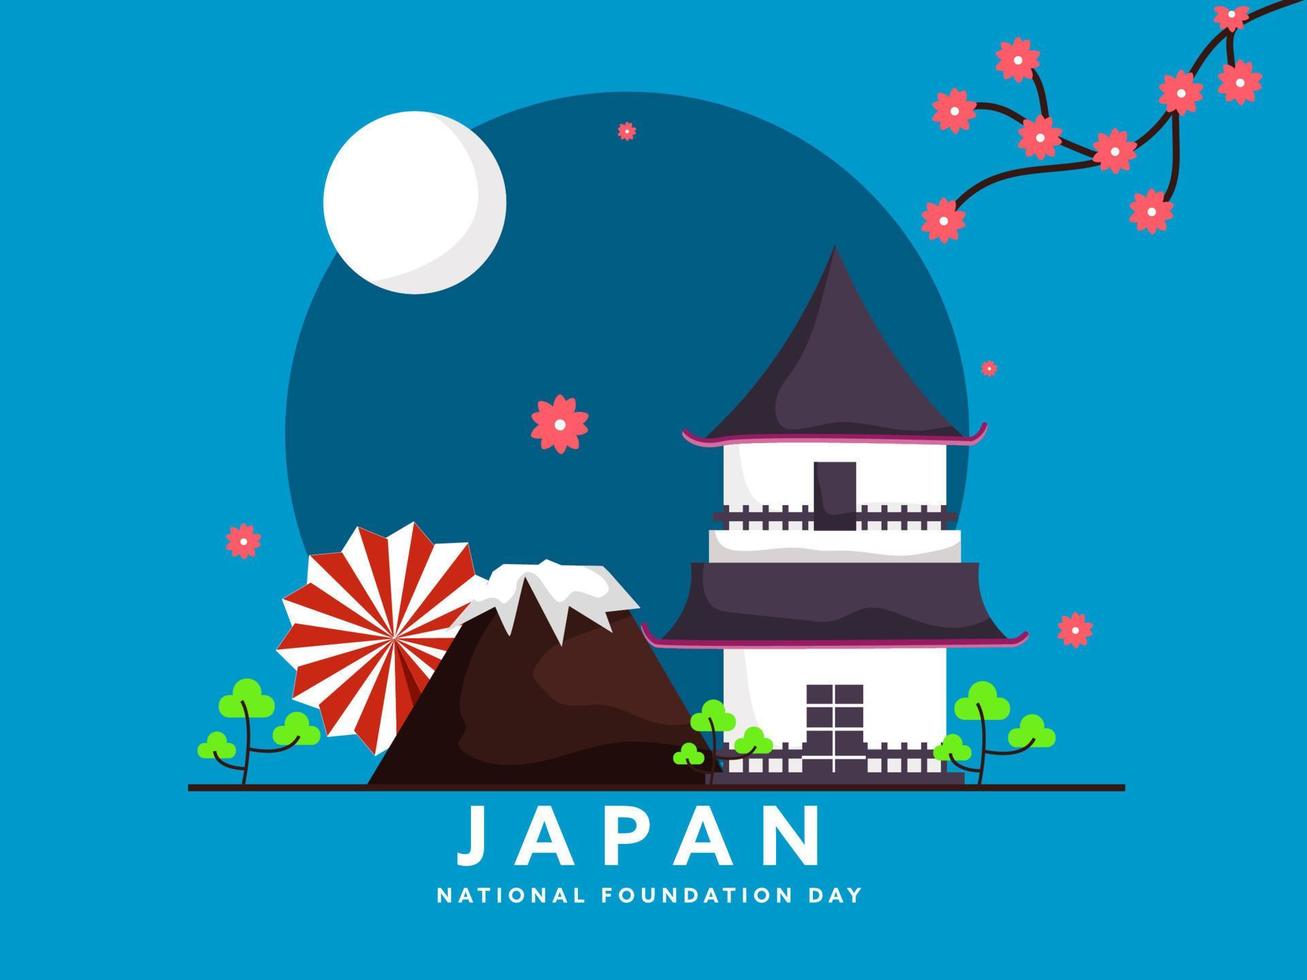 Japan National Foundation Day Concept With Japanese House, Mount Fuji, Trees And Sakura Flower Branch On Full Moon Blue Background. vector